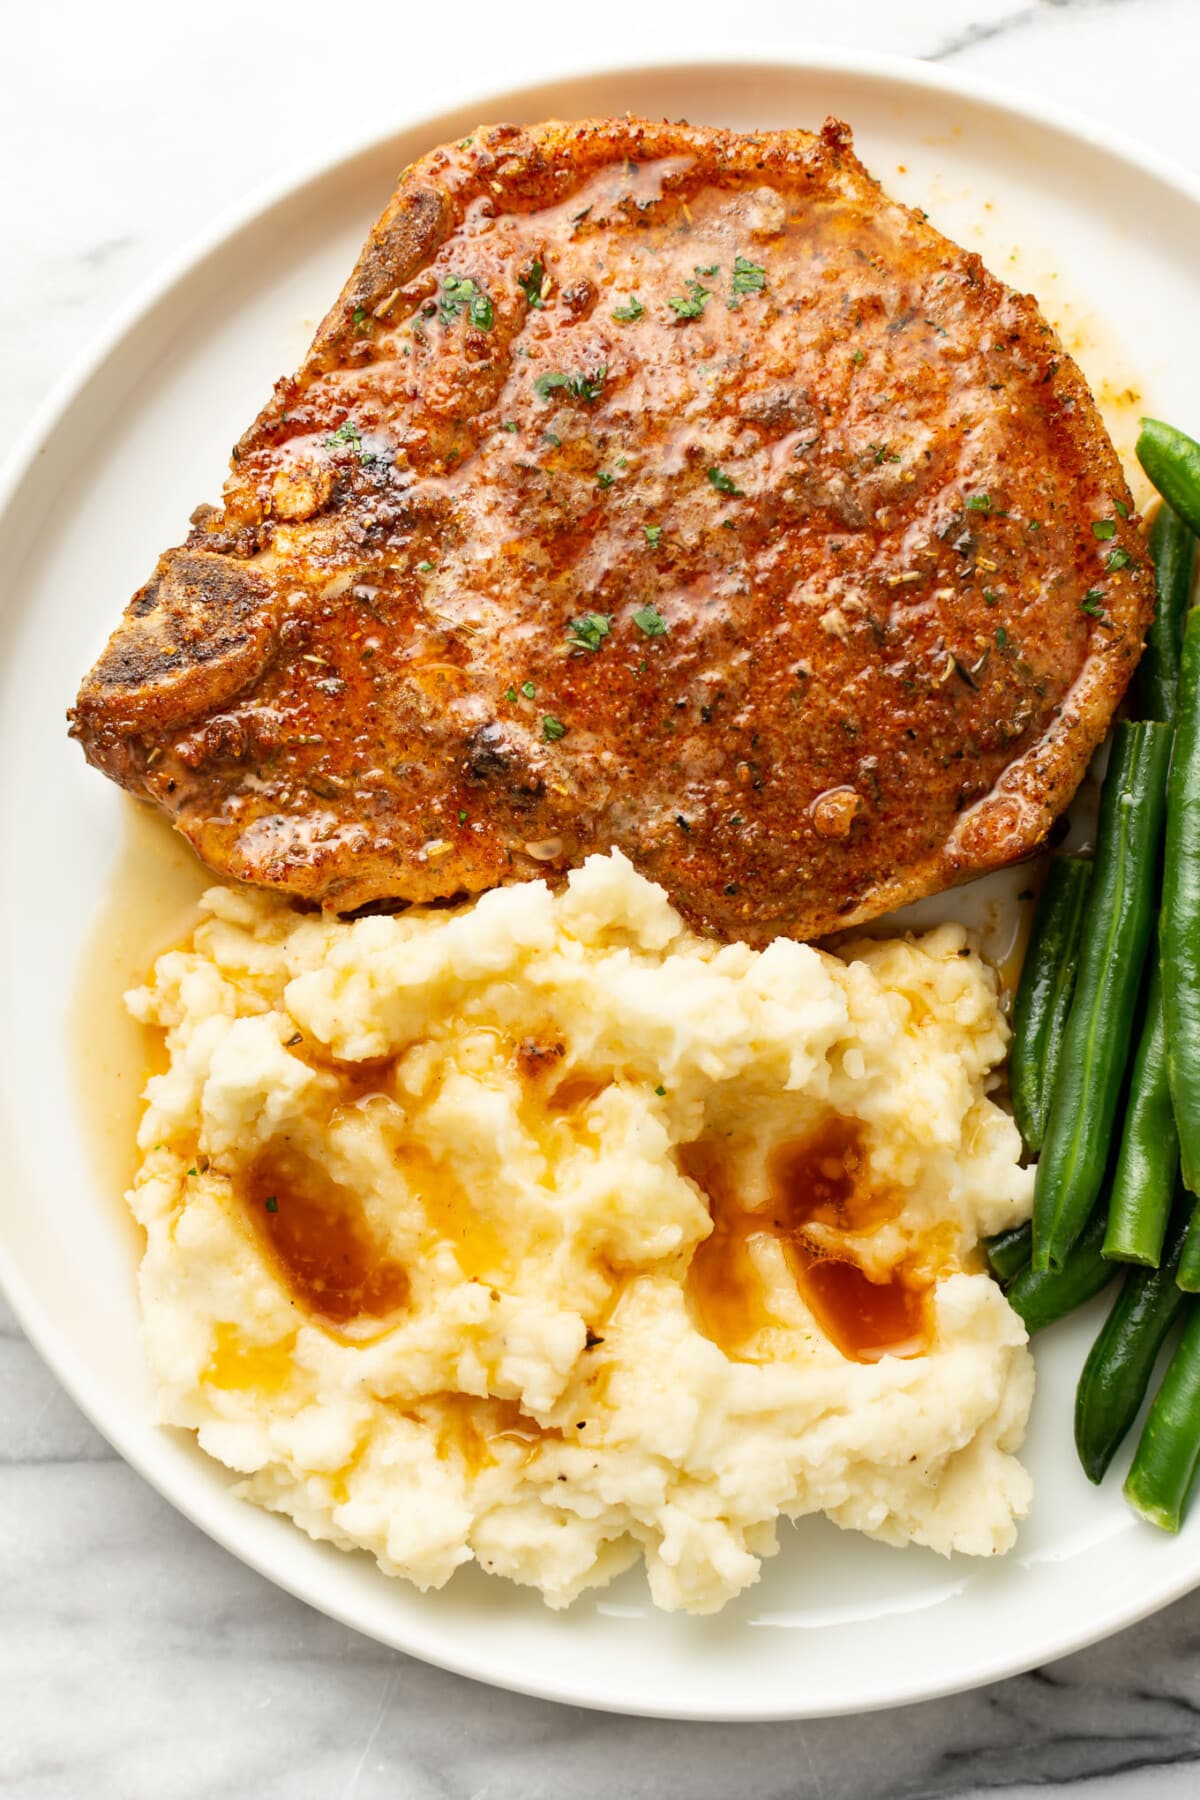 a plate with a baked pork chop, mashed potatoes, green beans, and sauce